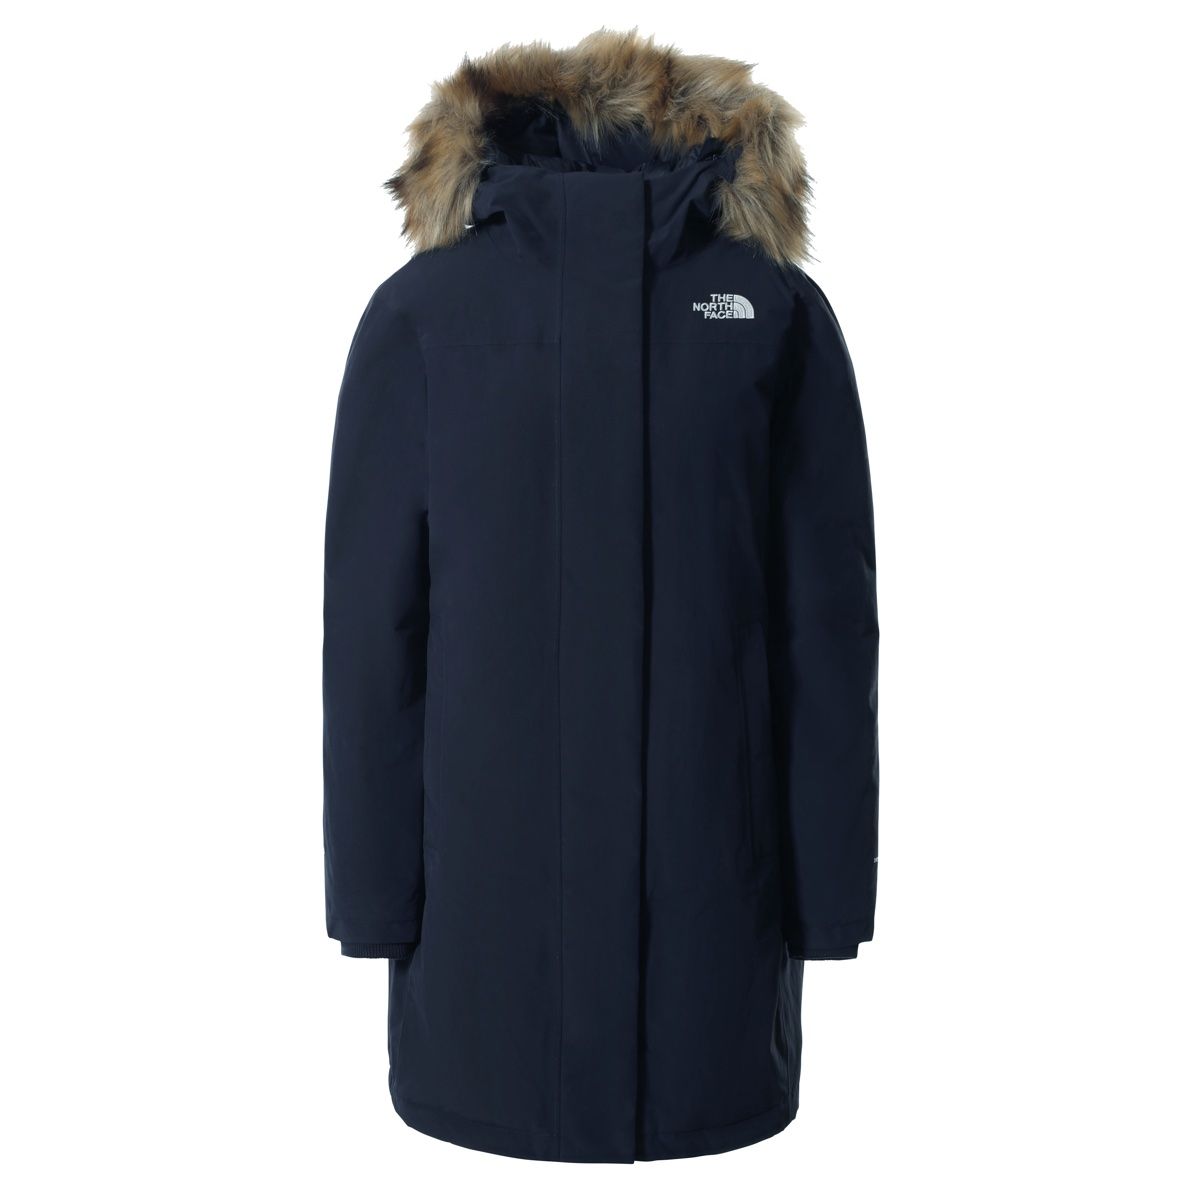 The North Face Arctic Parka Insulated Women's Jacket | Aviator Navy